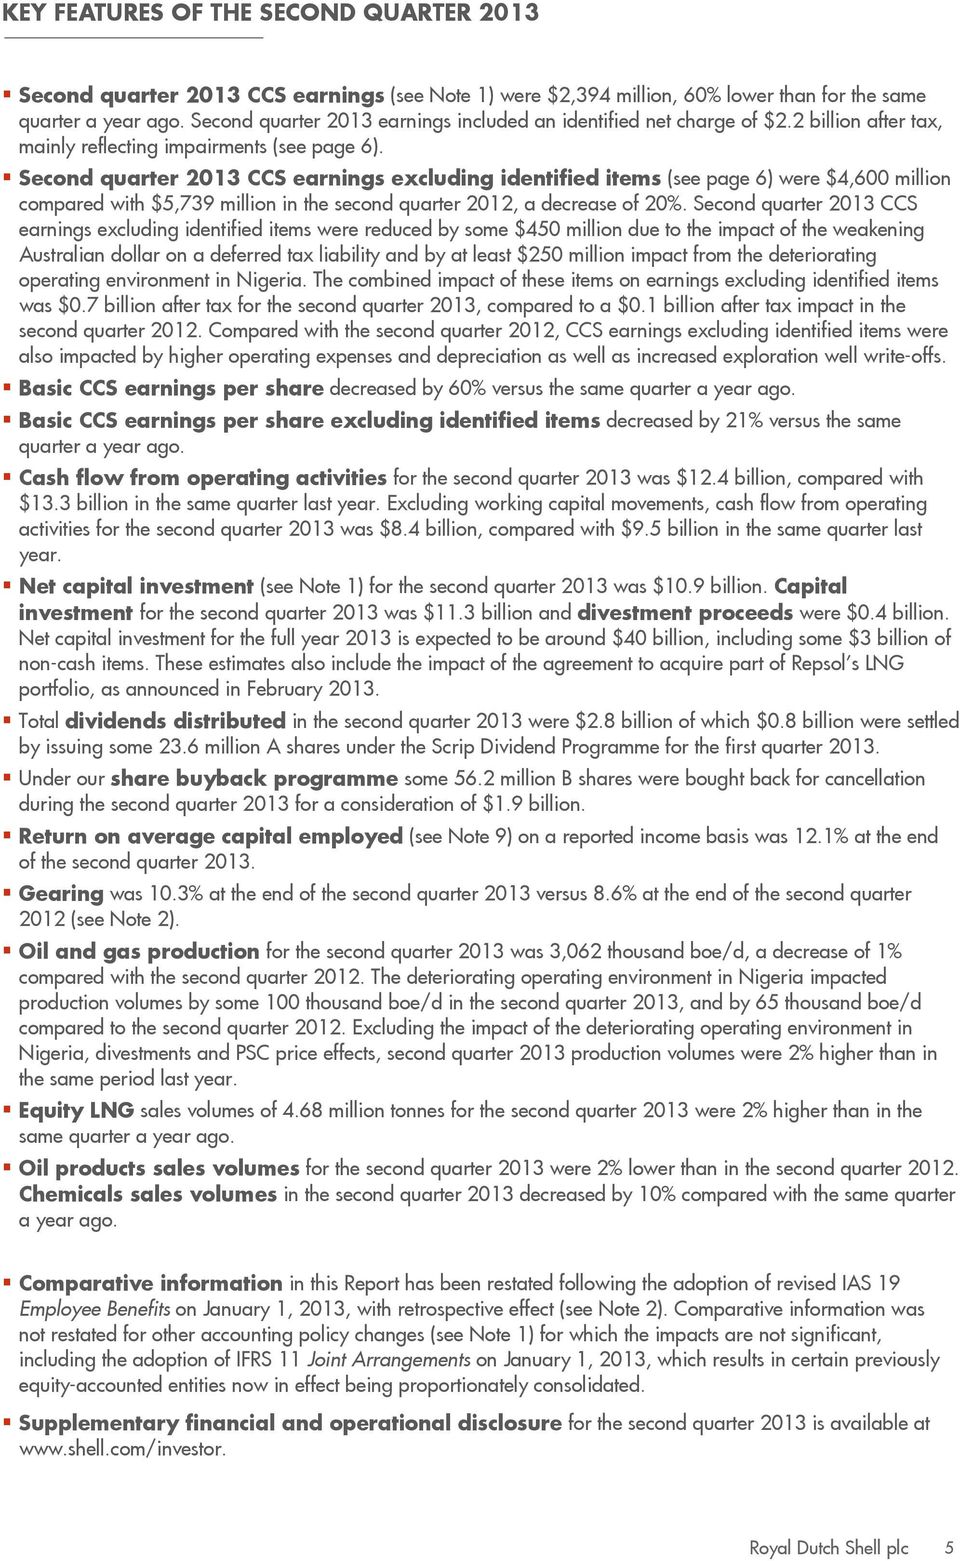 Second quarter 2013 CCS earnings excluding identified items (see page 6) were $4,600 million compared with $5,739 million in the second quarter 2012, a decrease of 20%.